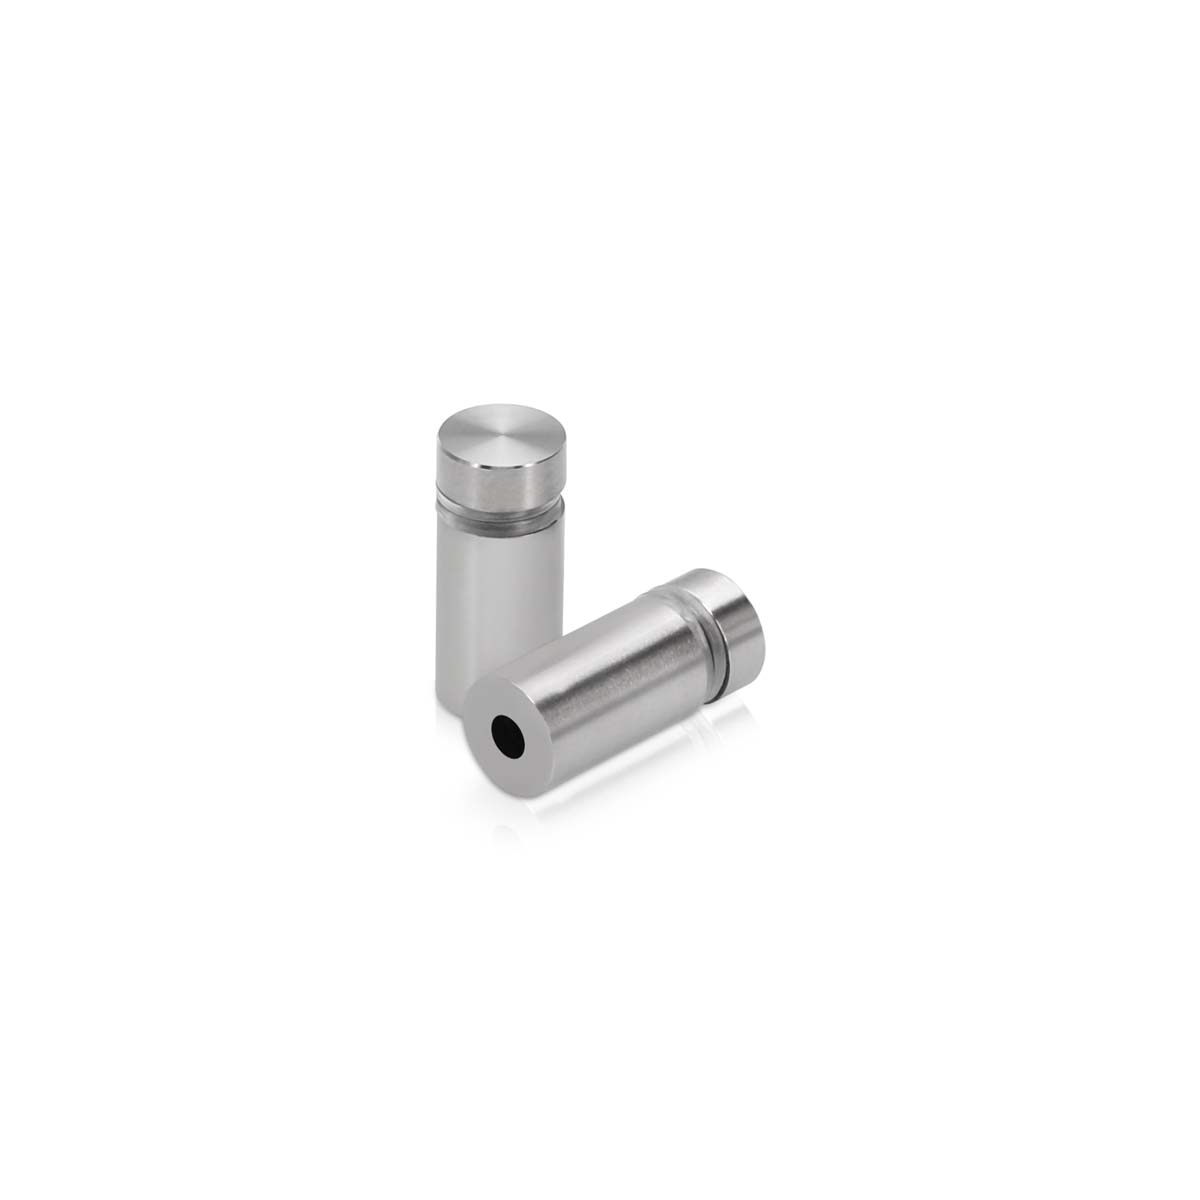 1/2'' Diameter X 3/4'' Barrel Length, Hollow Stainless Steel Brushed Finish. Easy Fasten Standoff (For Inside Use Only) [Required Material Hole Size: 3/8'']